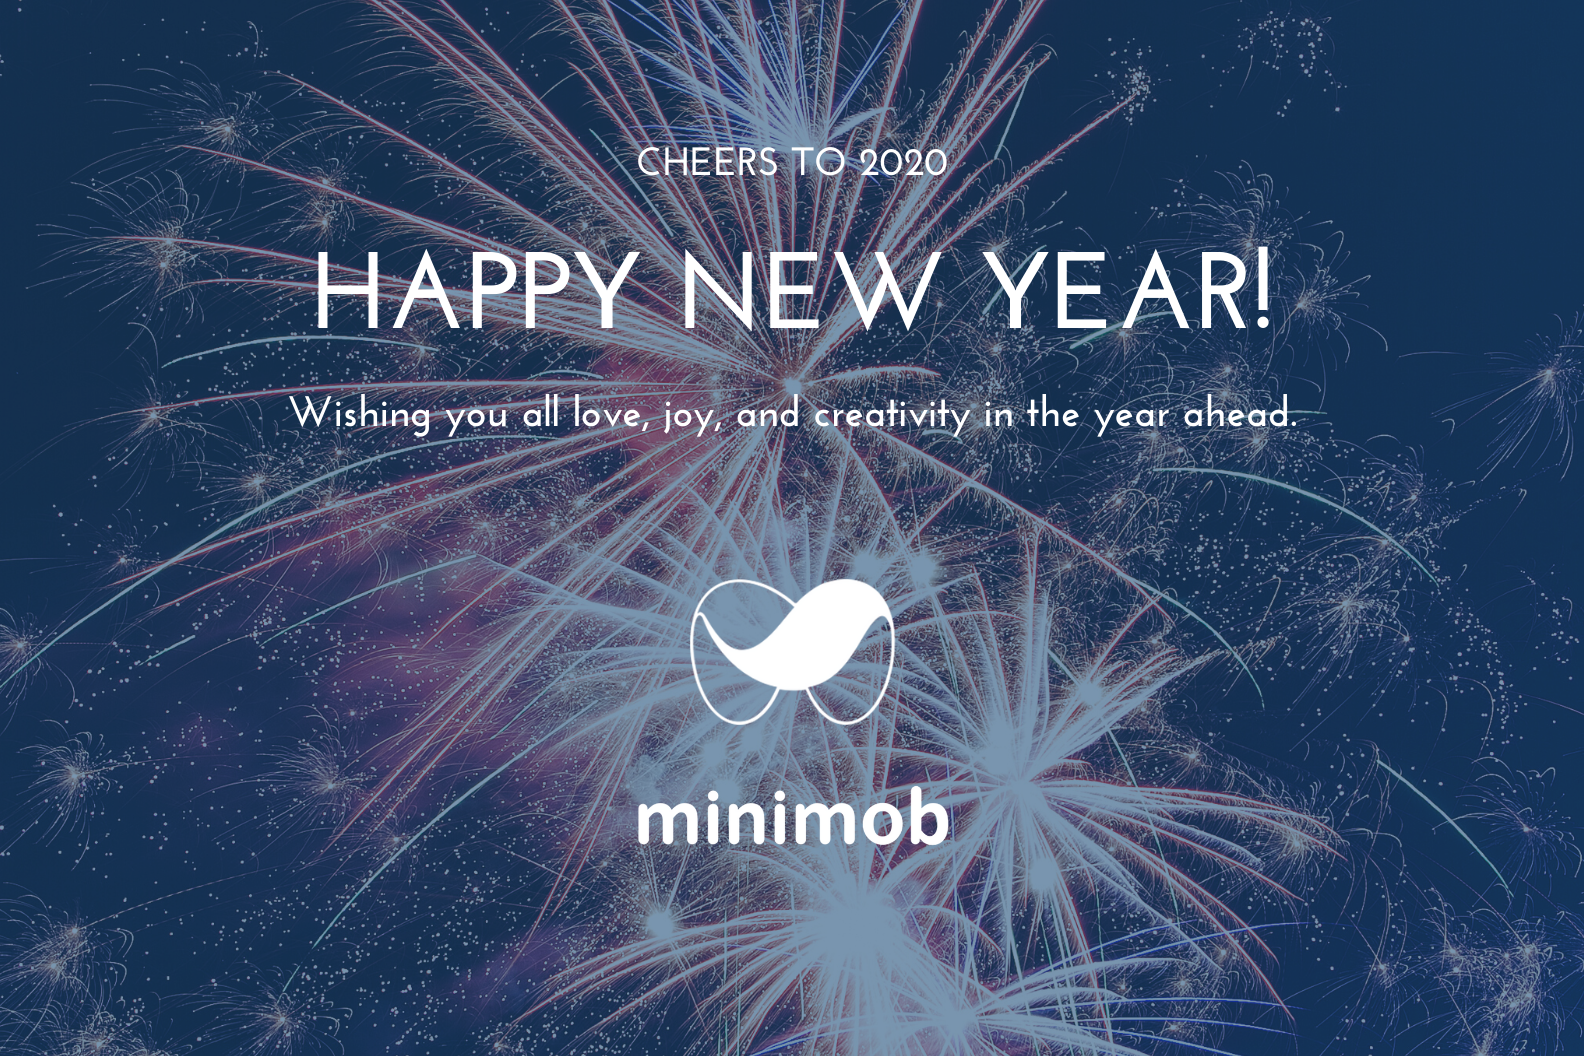 Minimob wishes you a Happy New Year!